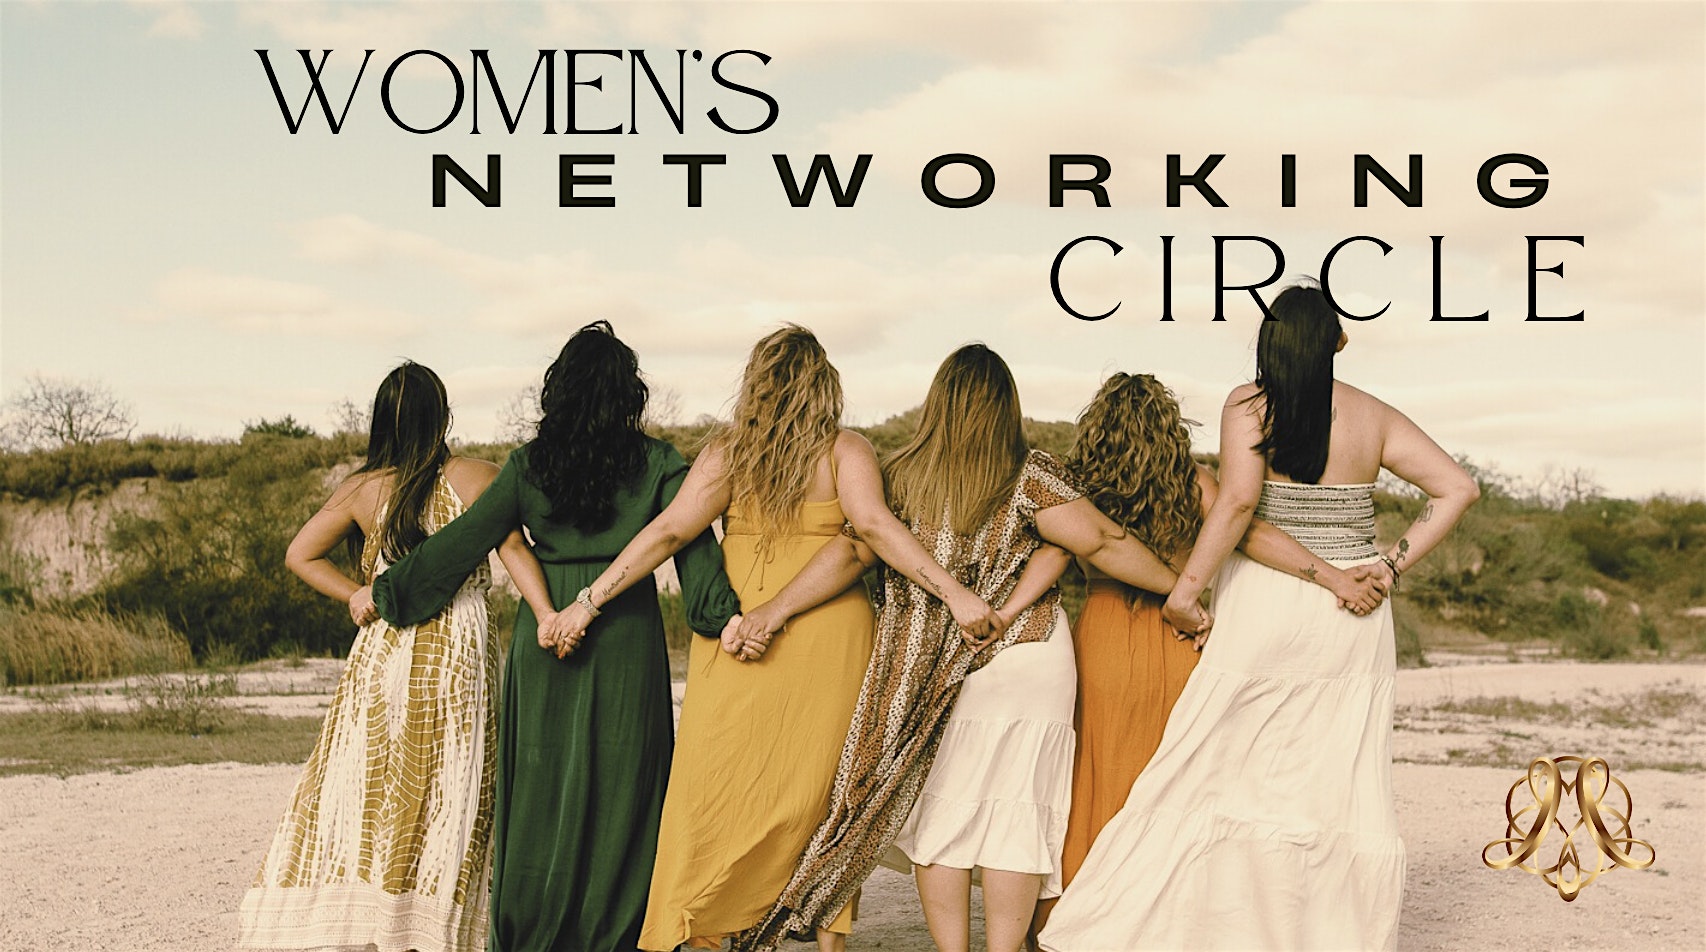 WOMEN'S NETWORKING CIRCLE FOR HOLISTIC AND CREATIVE ENTREPRENEURS HOUSTON